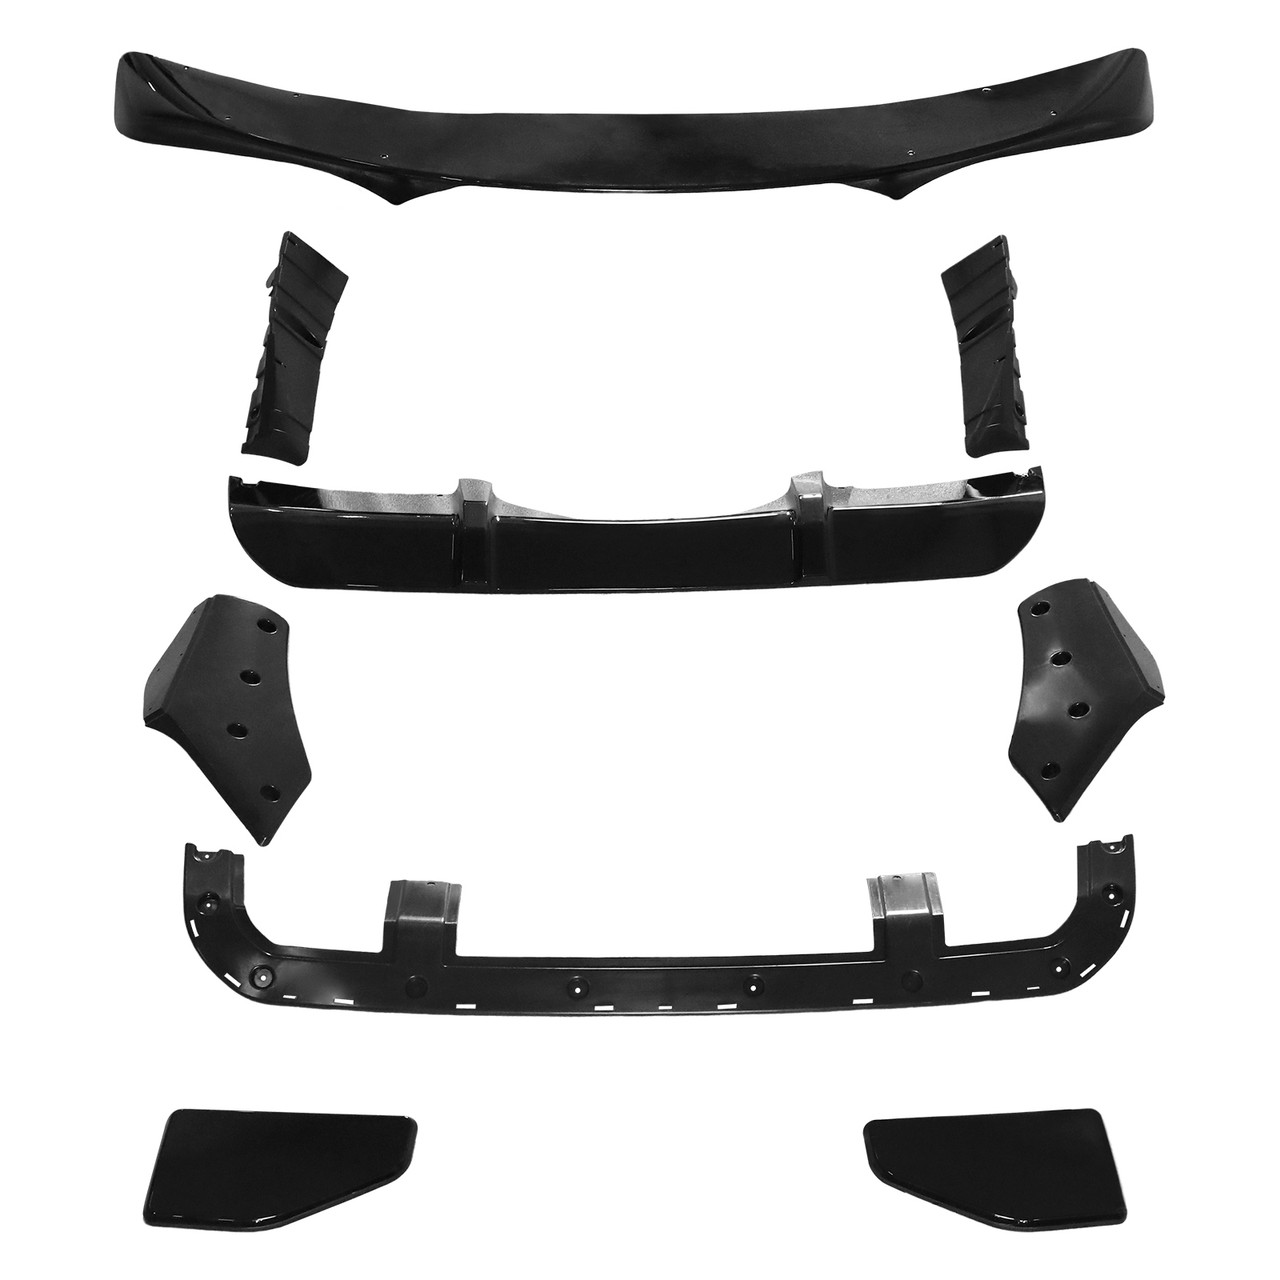 BMW X5 F15 M Sport Body Kit Front Lip Rear Diffuser Upgrade MP Style